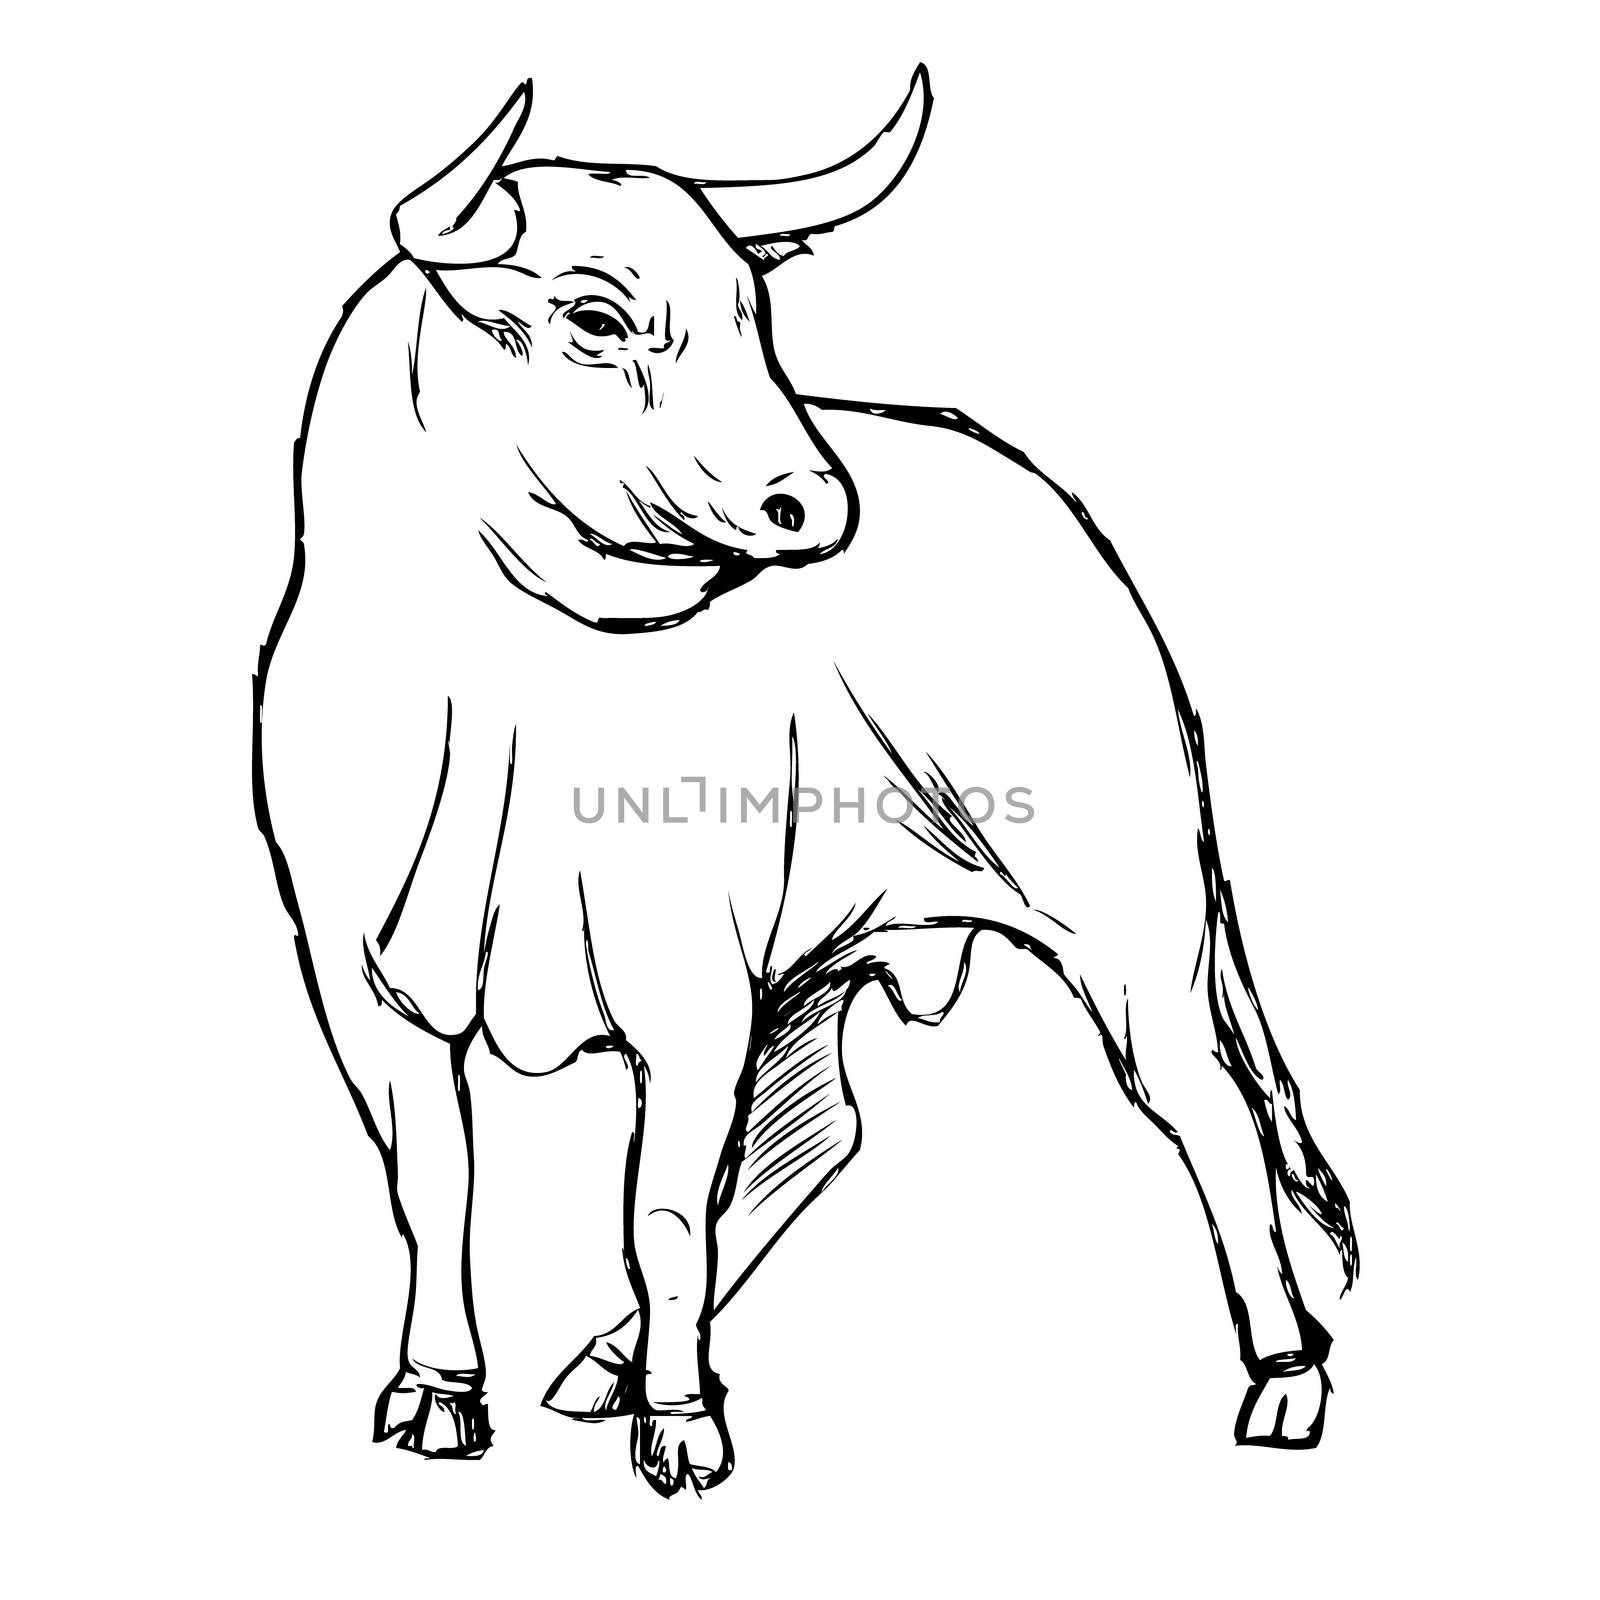 freehand sketch illustration of bull,  doodle hand drawn